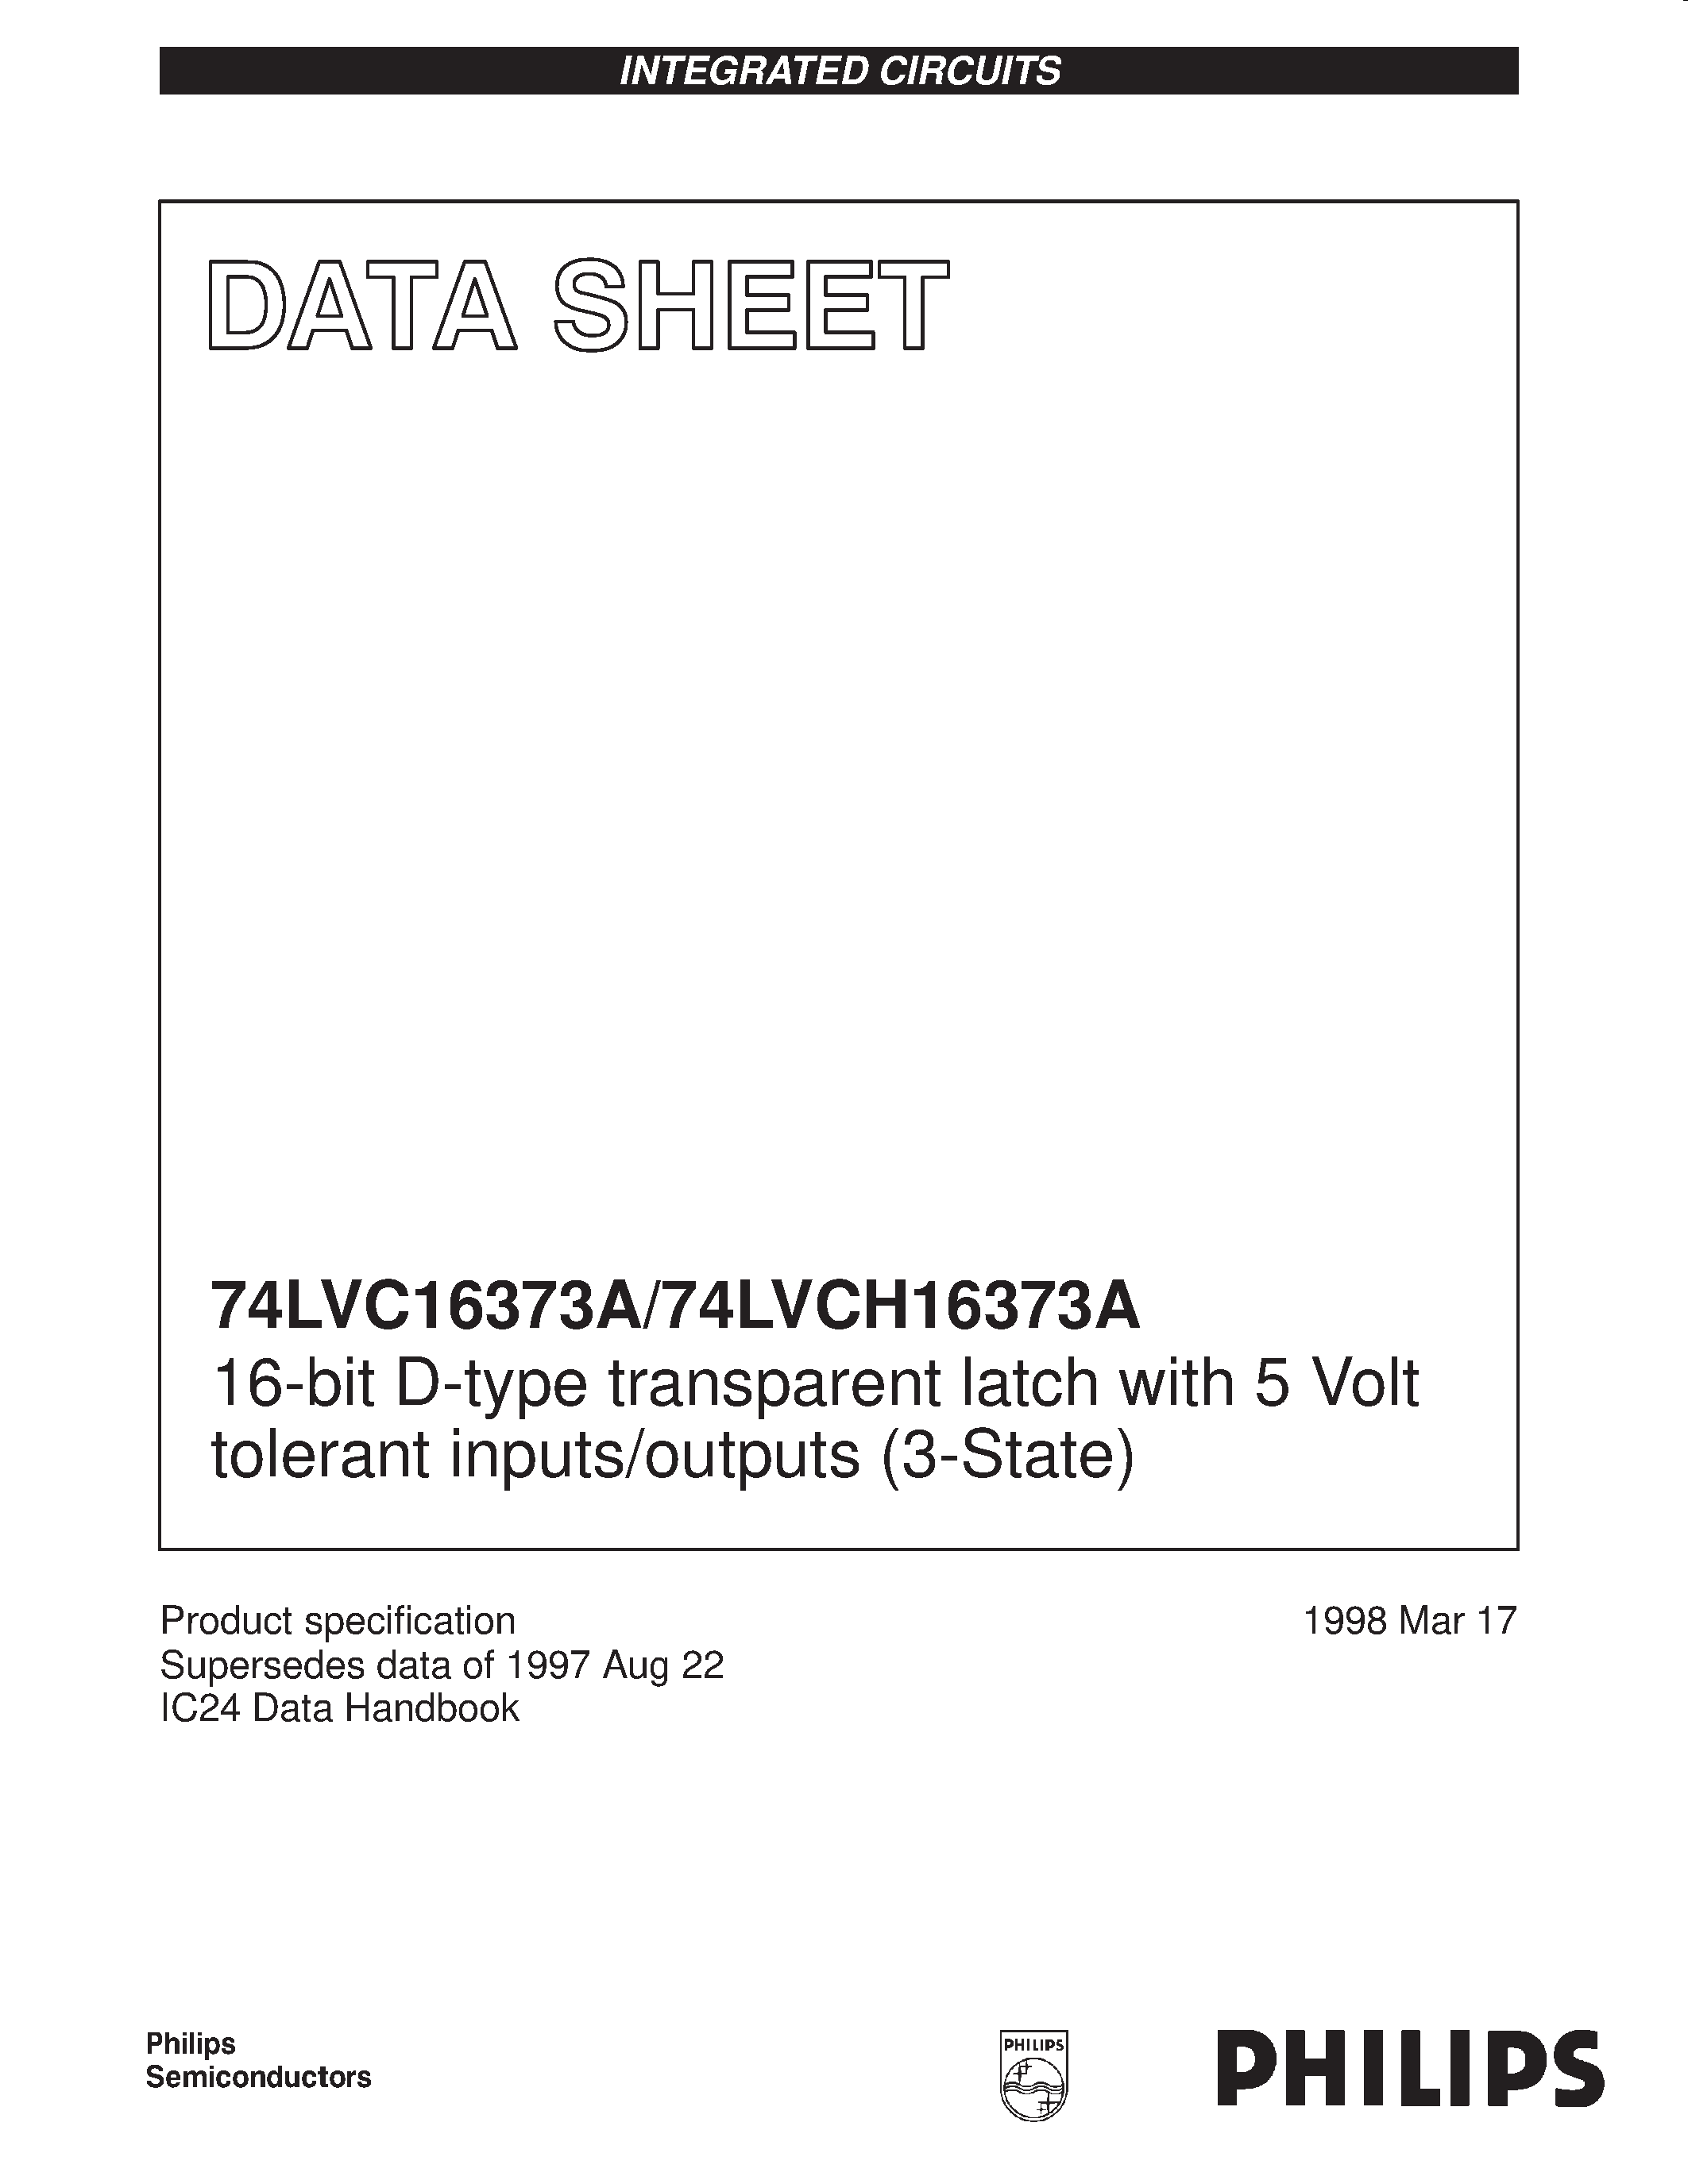 Datasheet VC16373ADL - 16-bit D-type transparent latch with 5 Volt tolerant inputs/outputs 3-State page 1